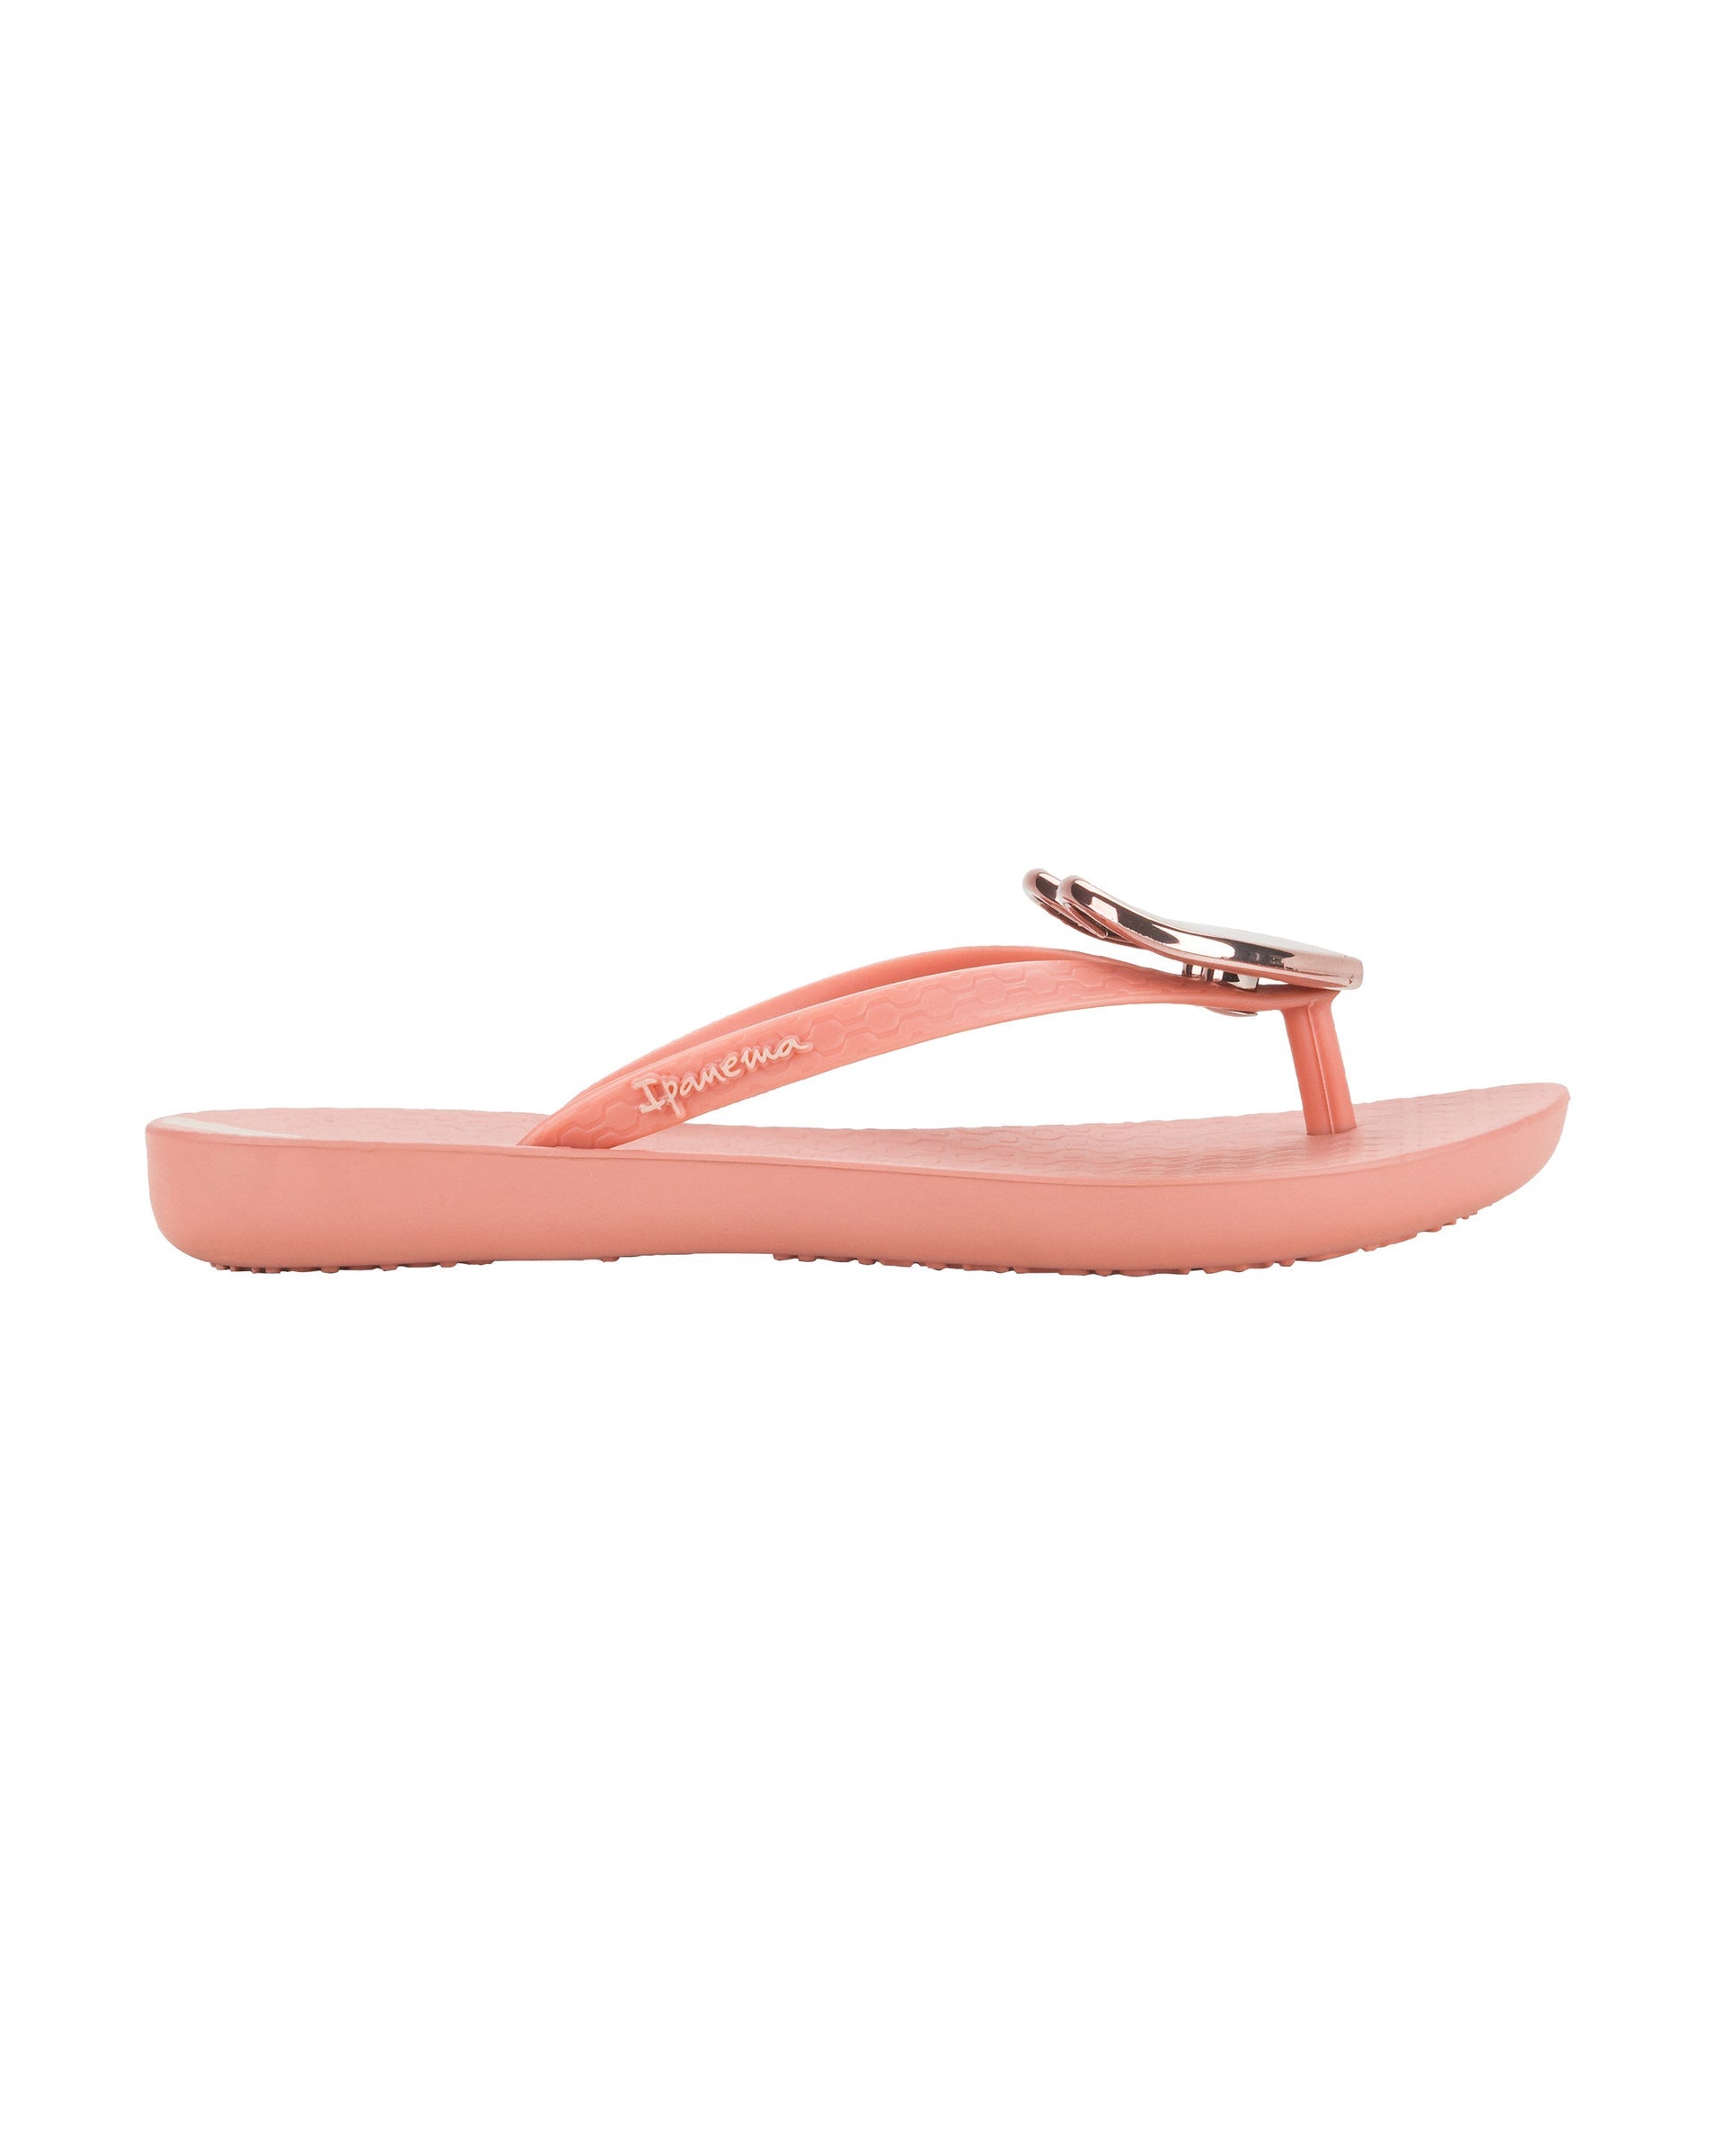 Outer view  of a pink Ipanema Wave Heart kids flip flop with rose gold decorative heart on the upper.